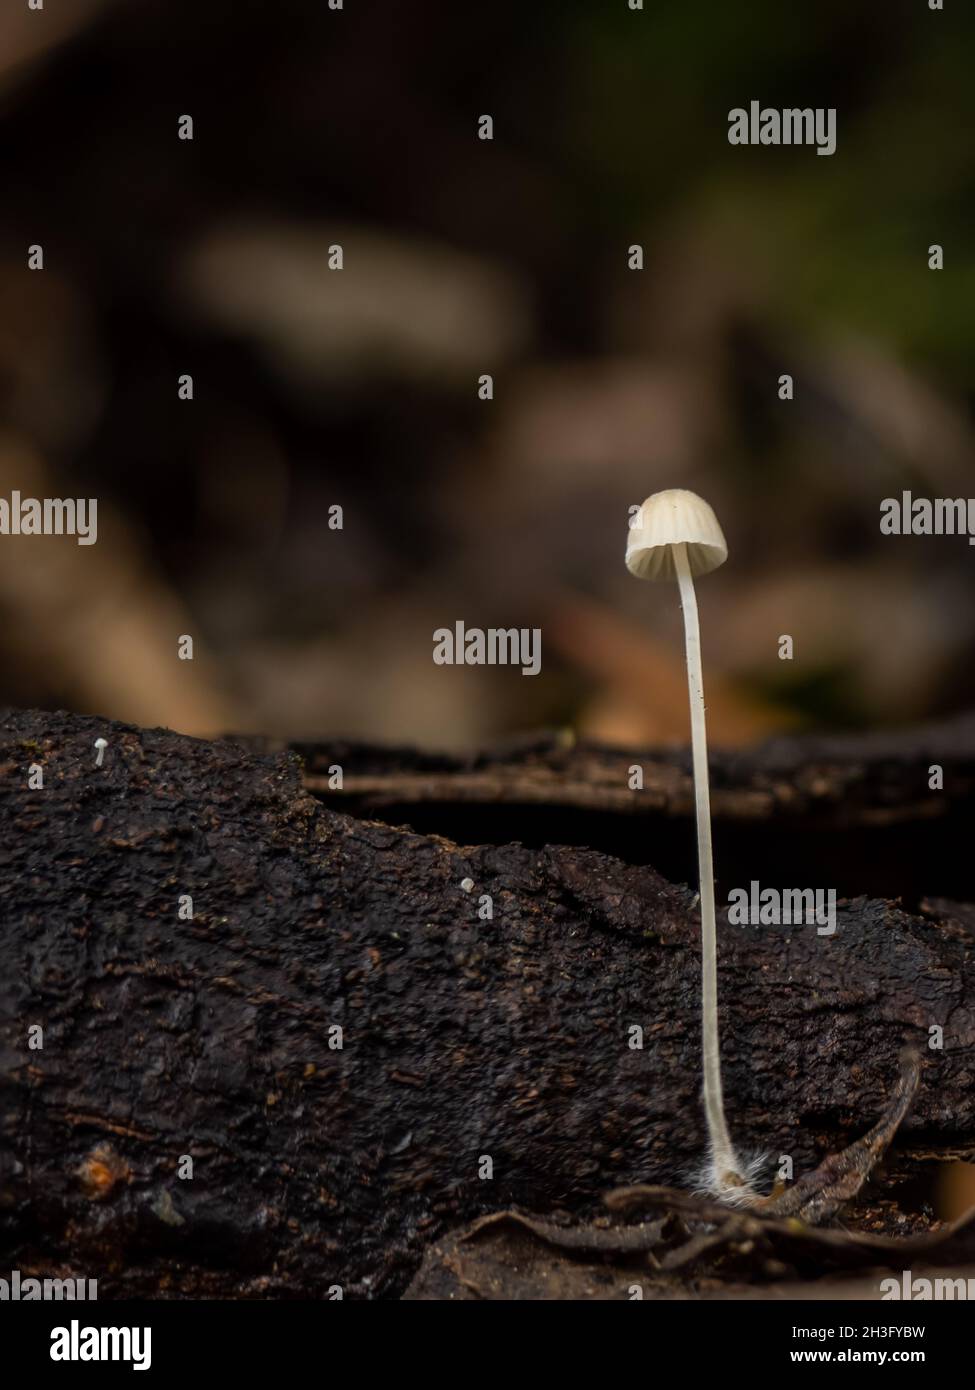 One very small Bonnet or Mycena species fungus, with two even tinier mushrooms to the left, on the log. Stock Photo